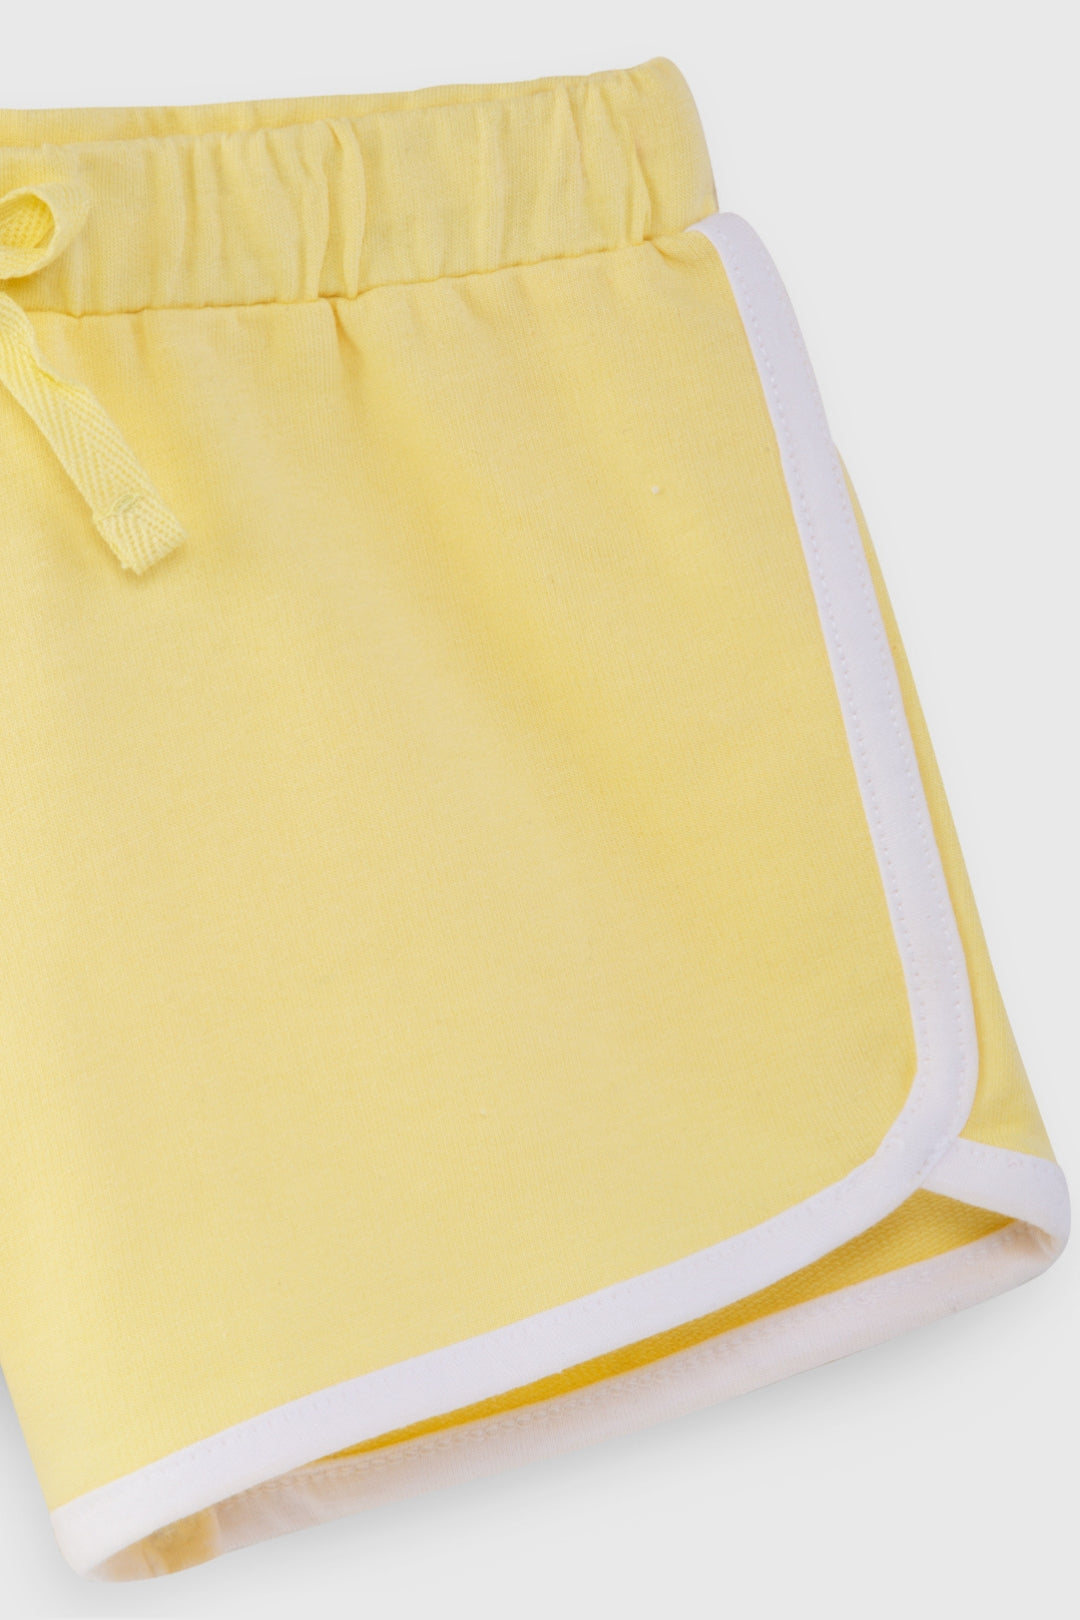 Yellow and Navy  Shorts Pack of 2